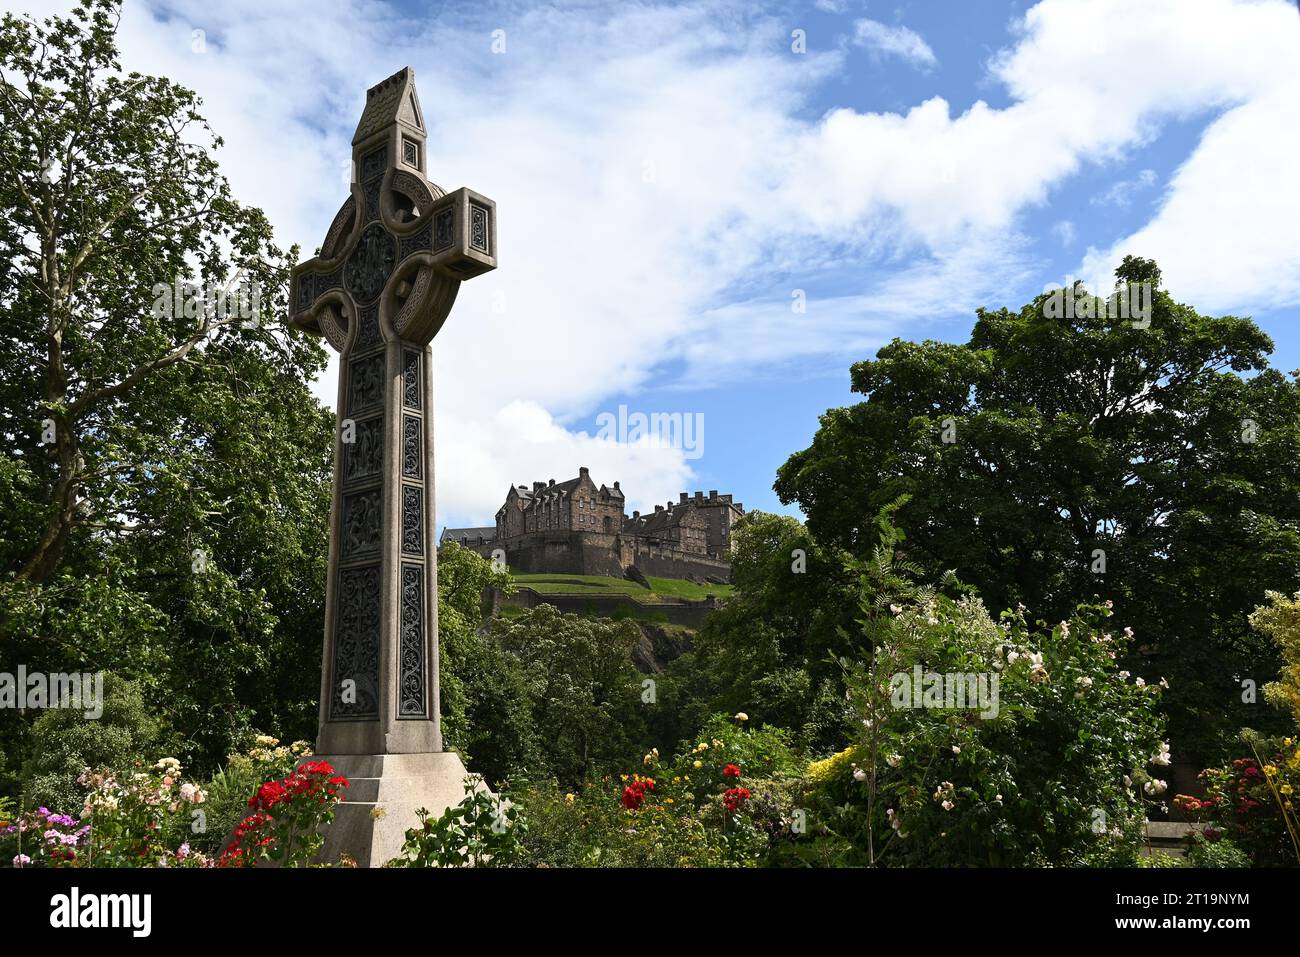 The castle of Edinburgh as seen from Princes street with a celtic cross standing forward, Scotland. Stock Photo